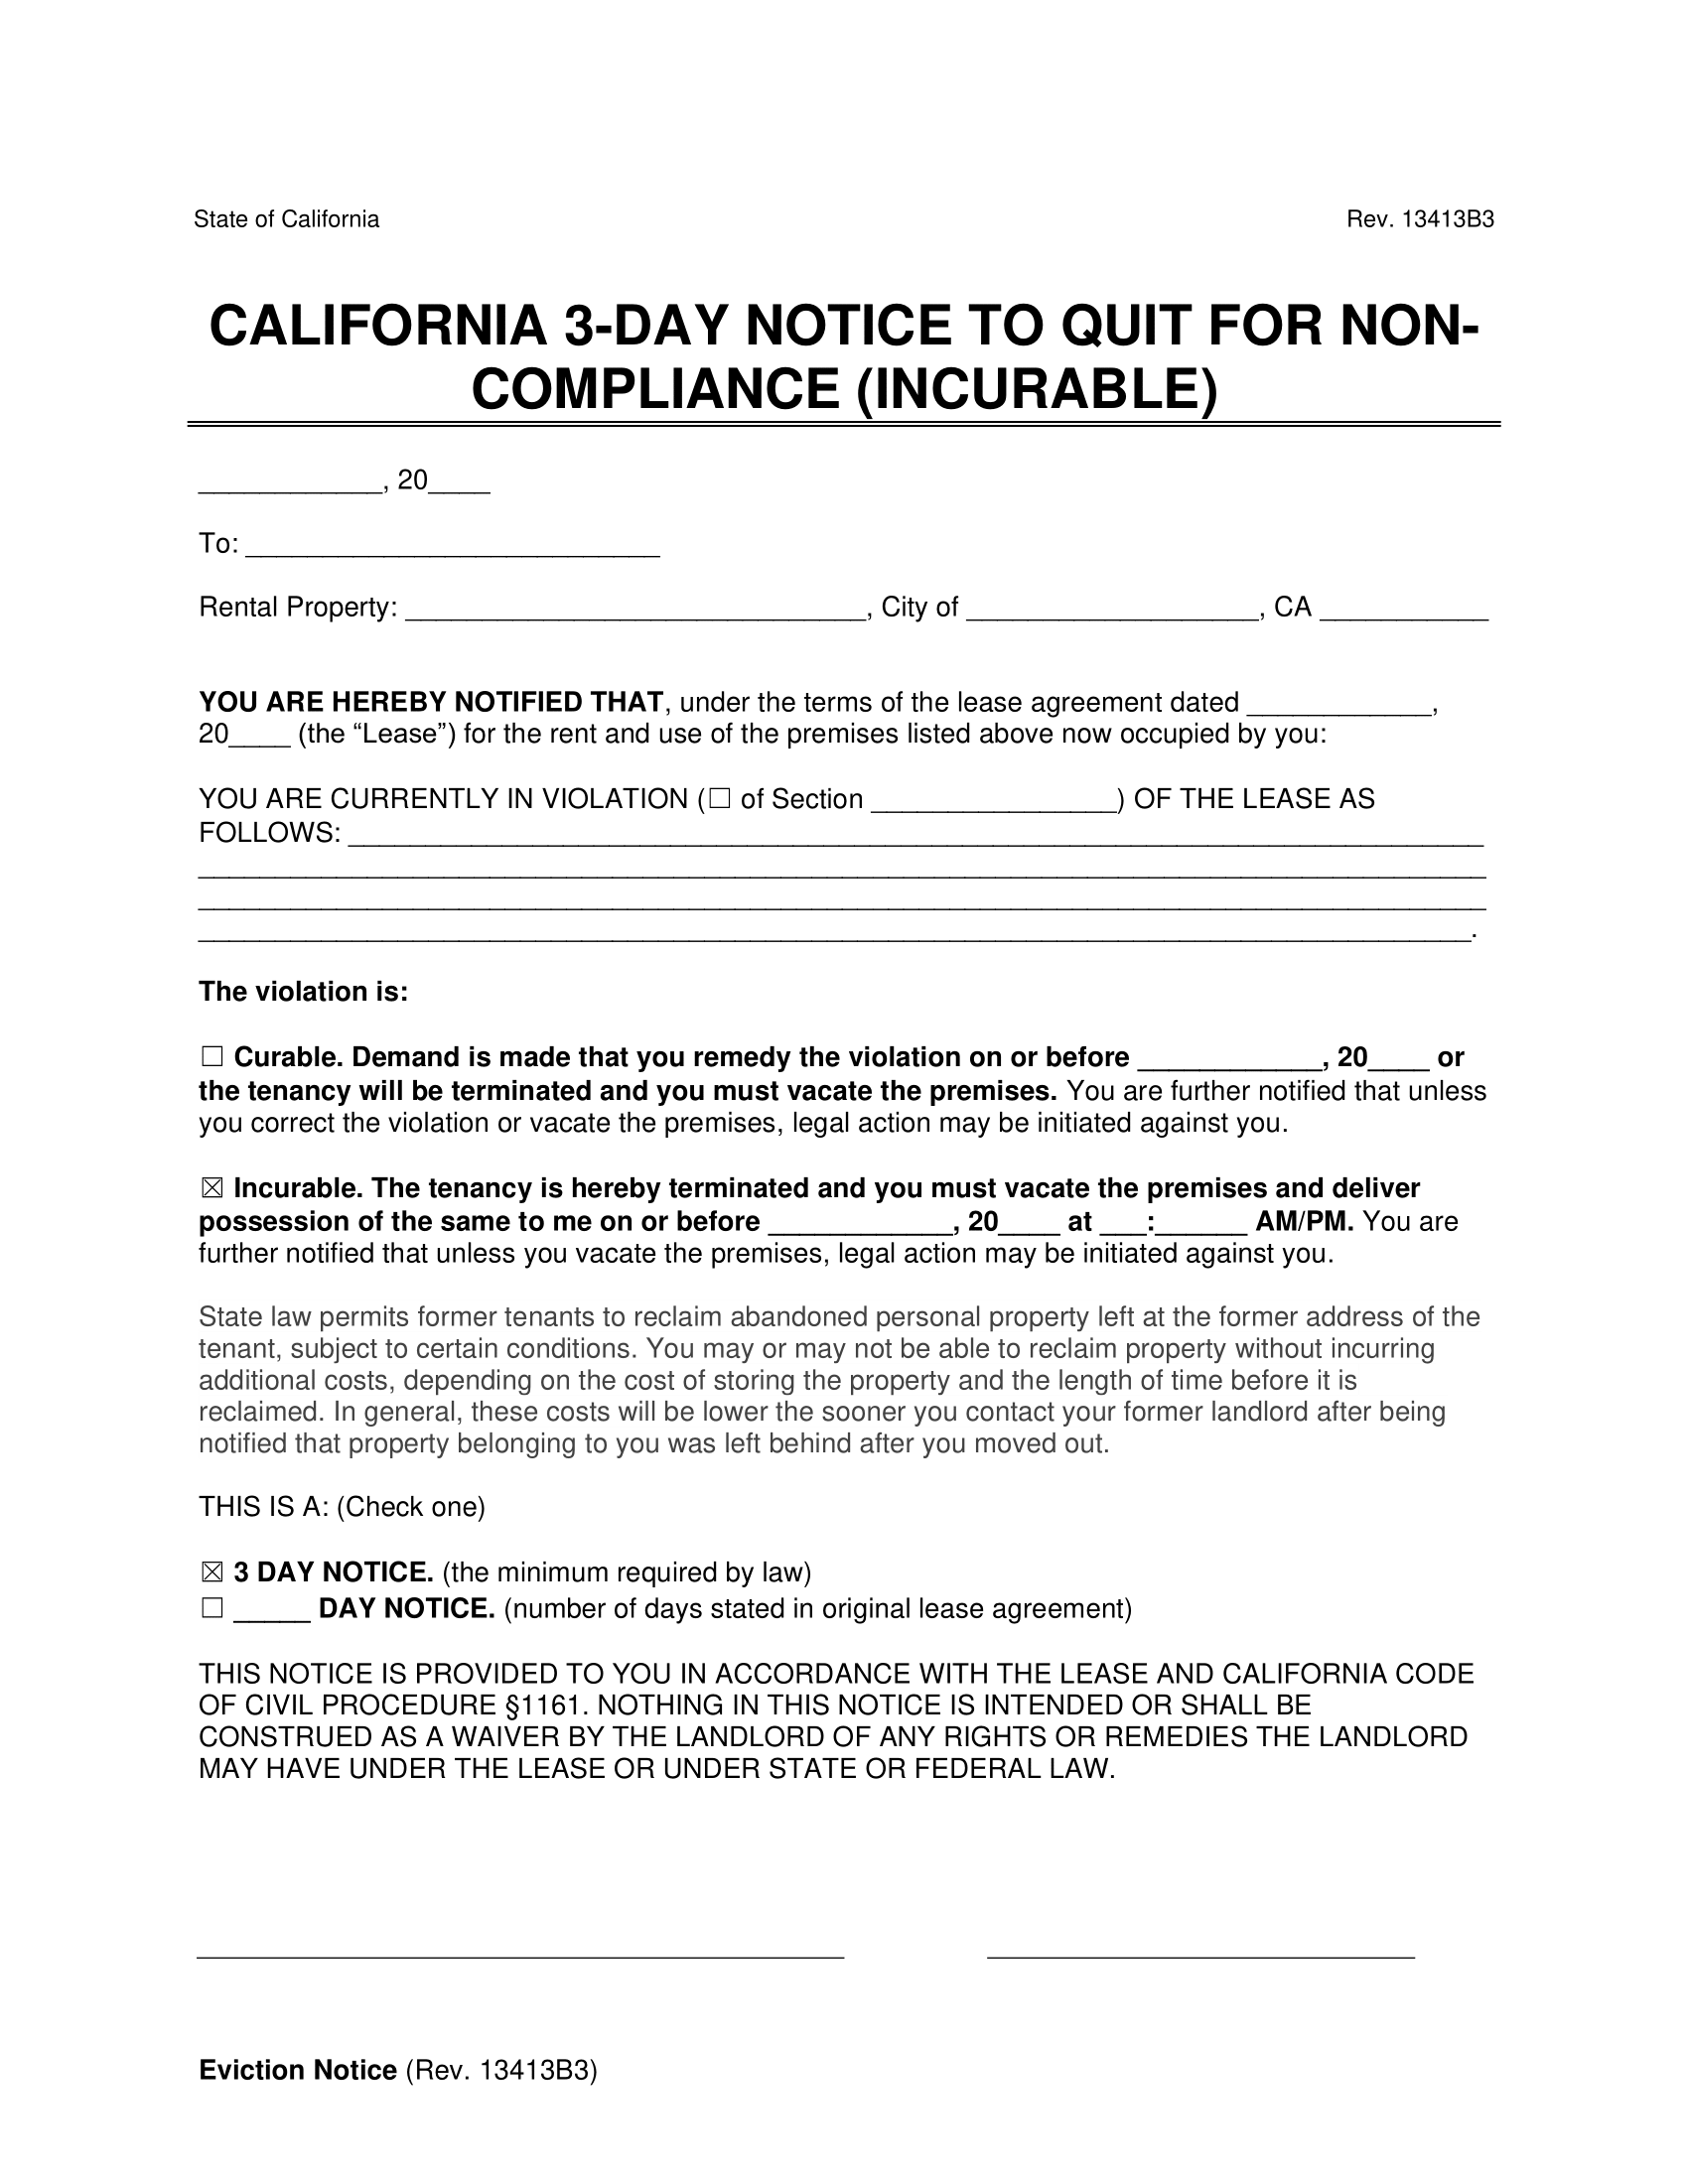 California 3-Day Notice to Quit for Incurable Non-Compliance